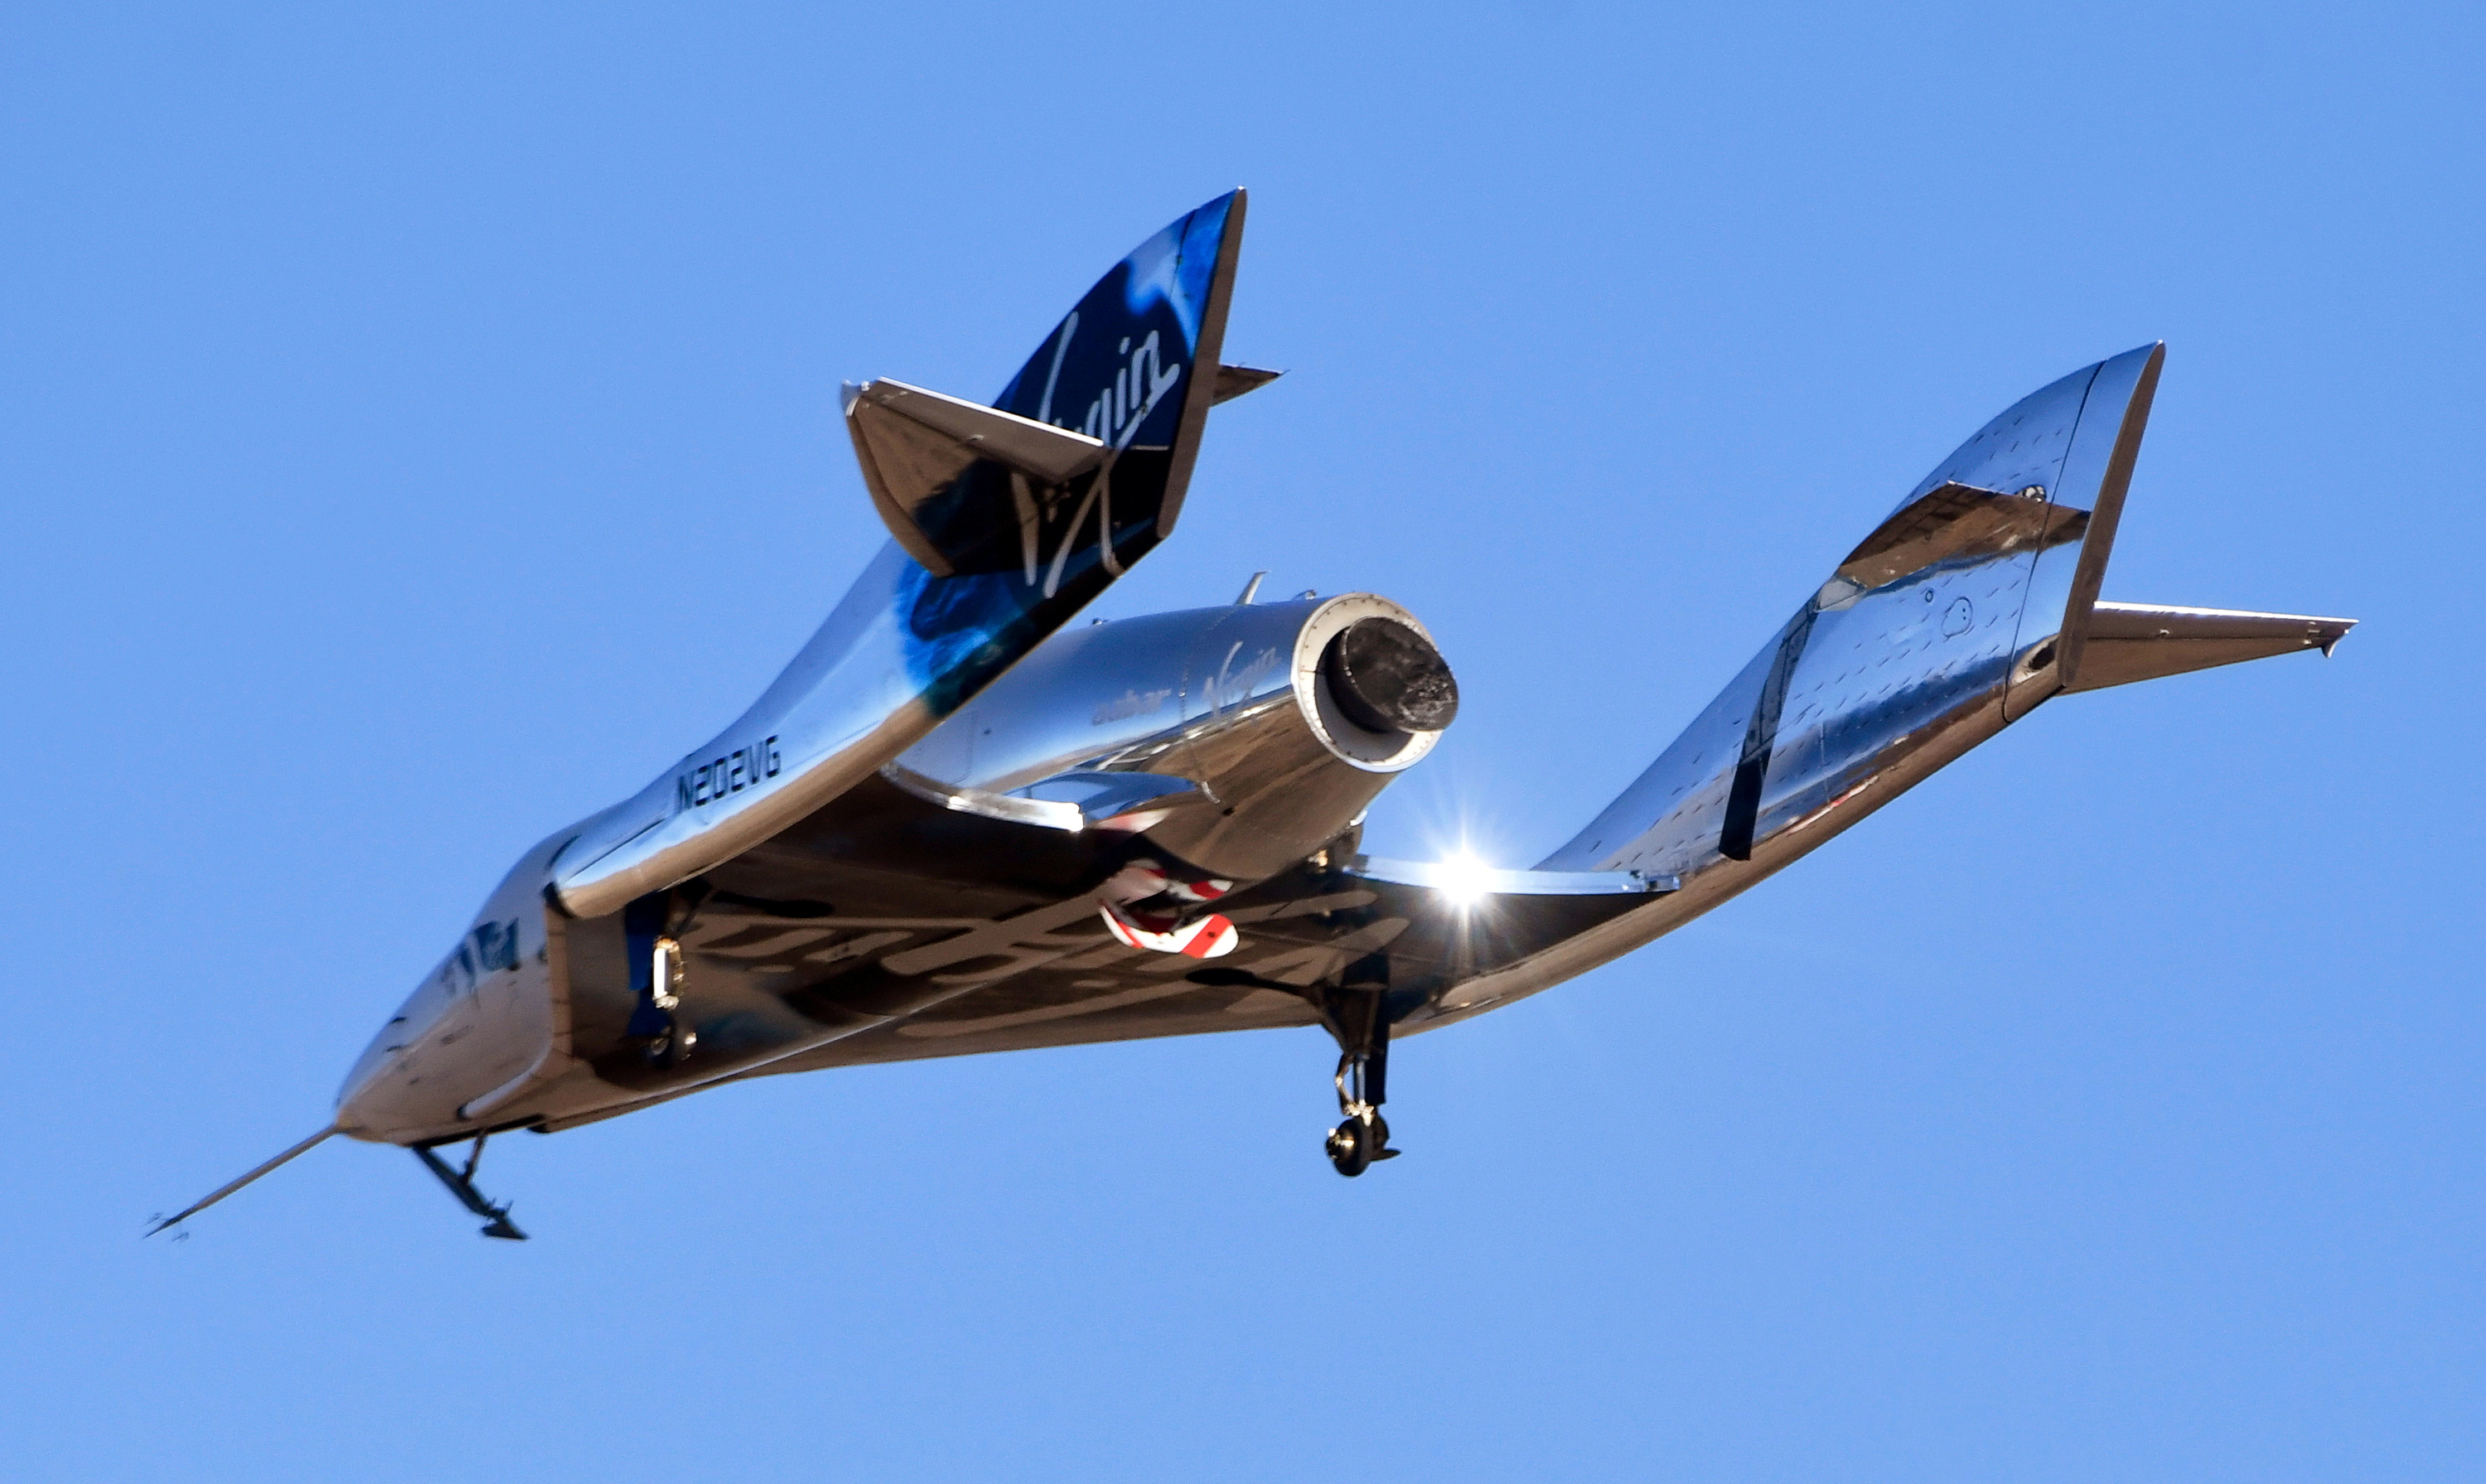 Virgin Galactic’s space tourism rocket plane SpaceShipTwo returns after a test flight  from Mojave Air and Space Port in Mojave